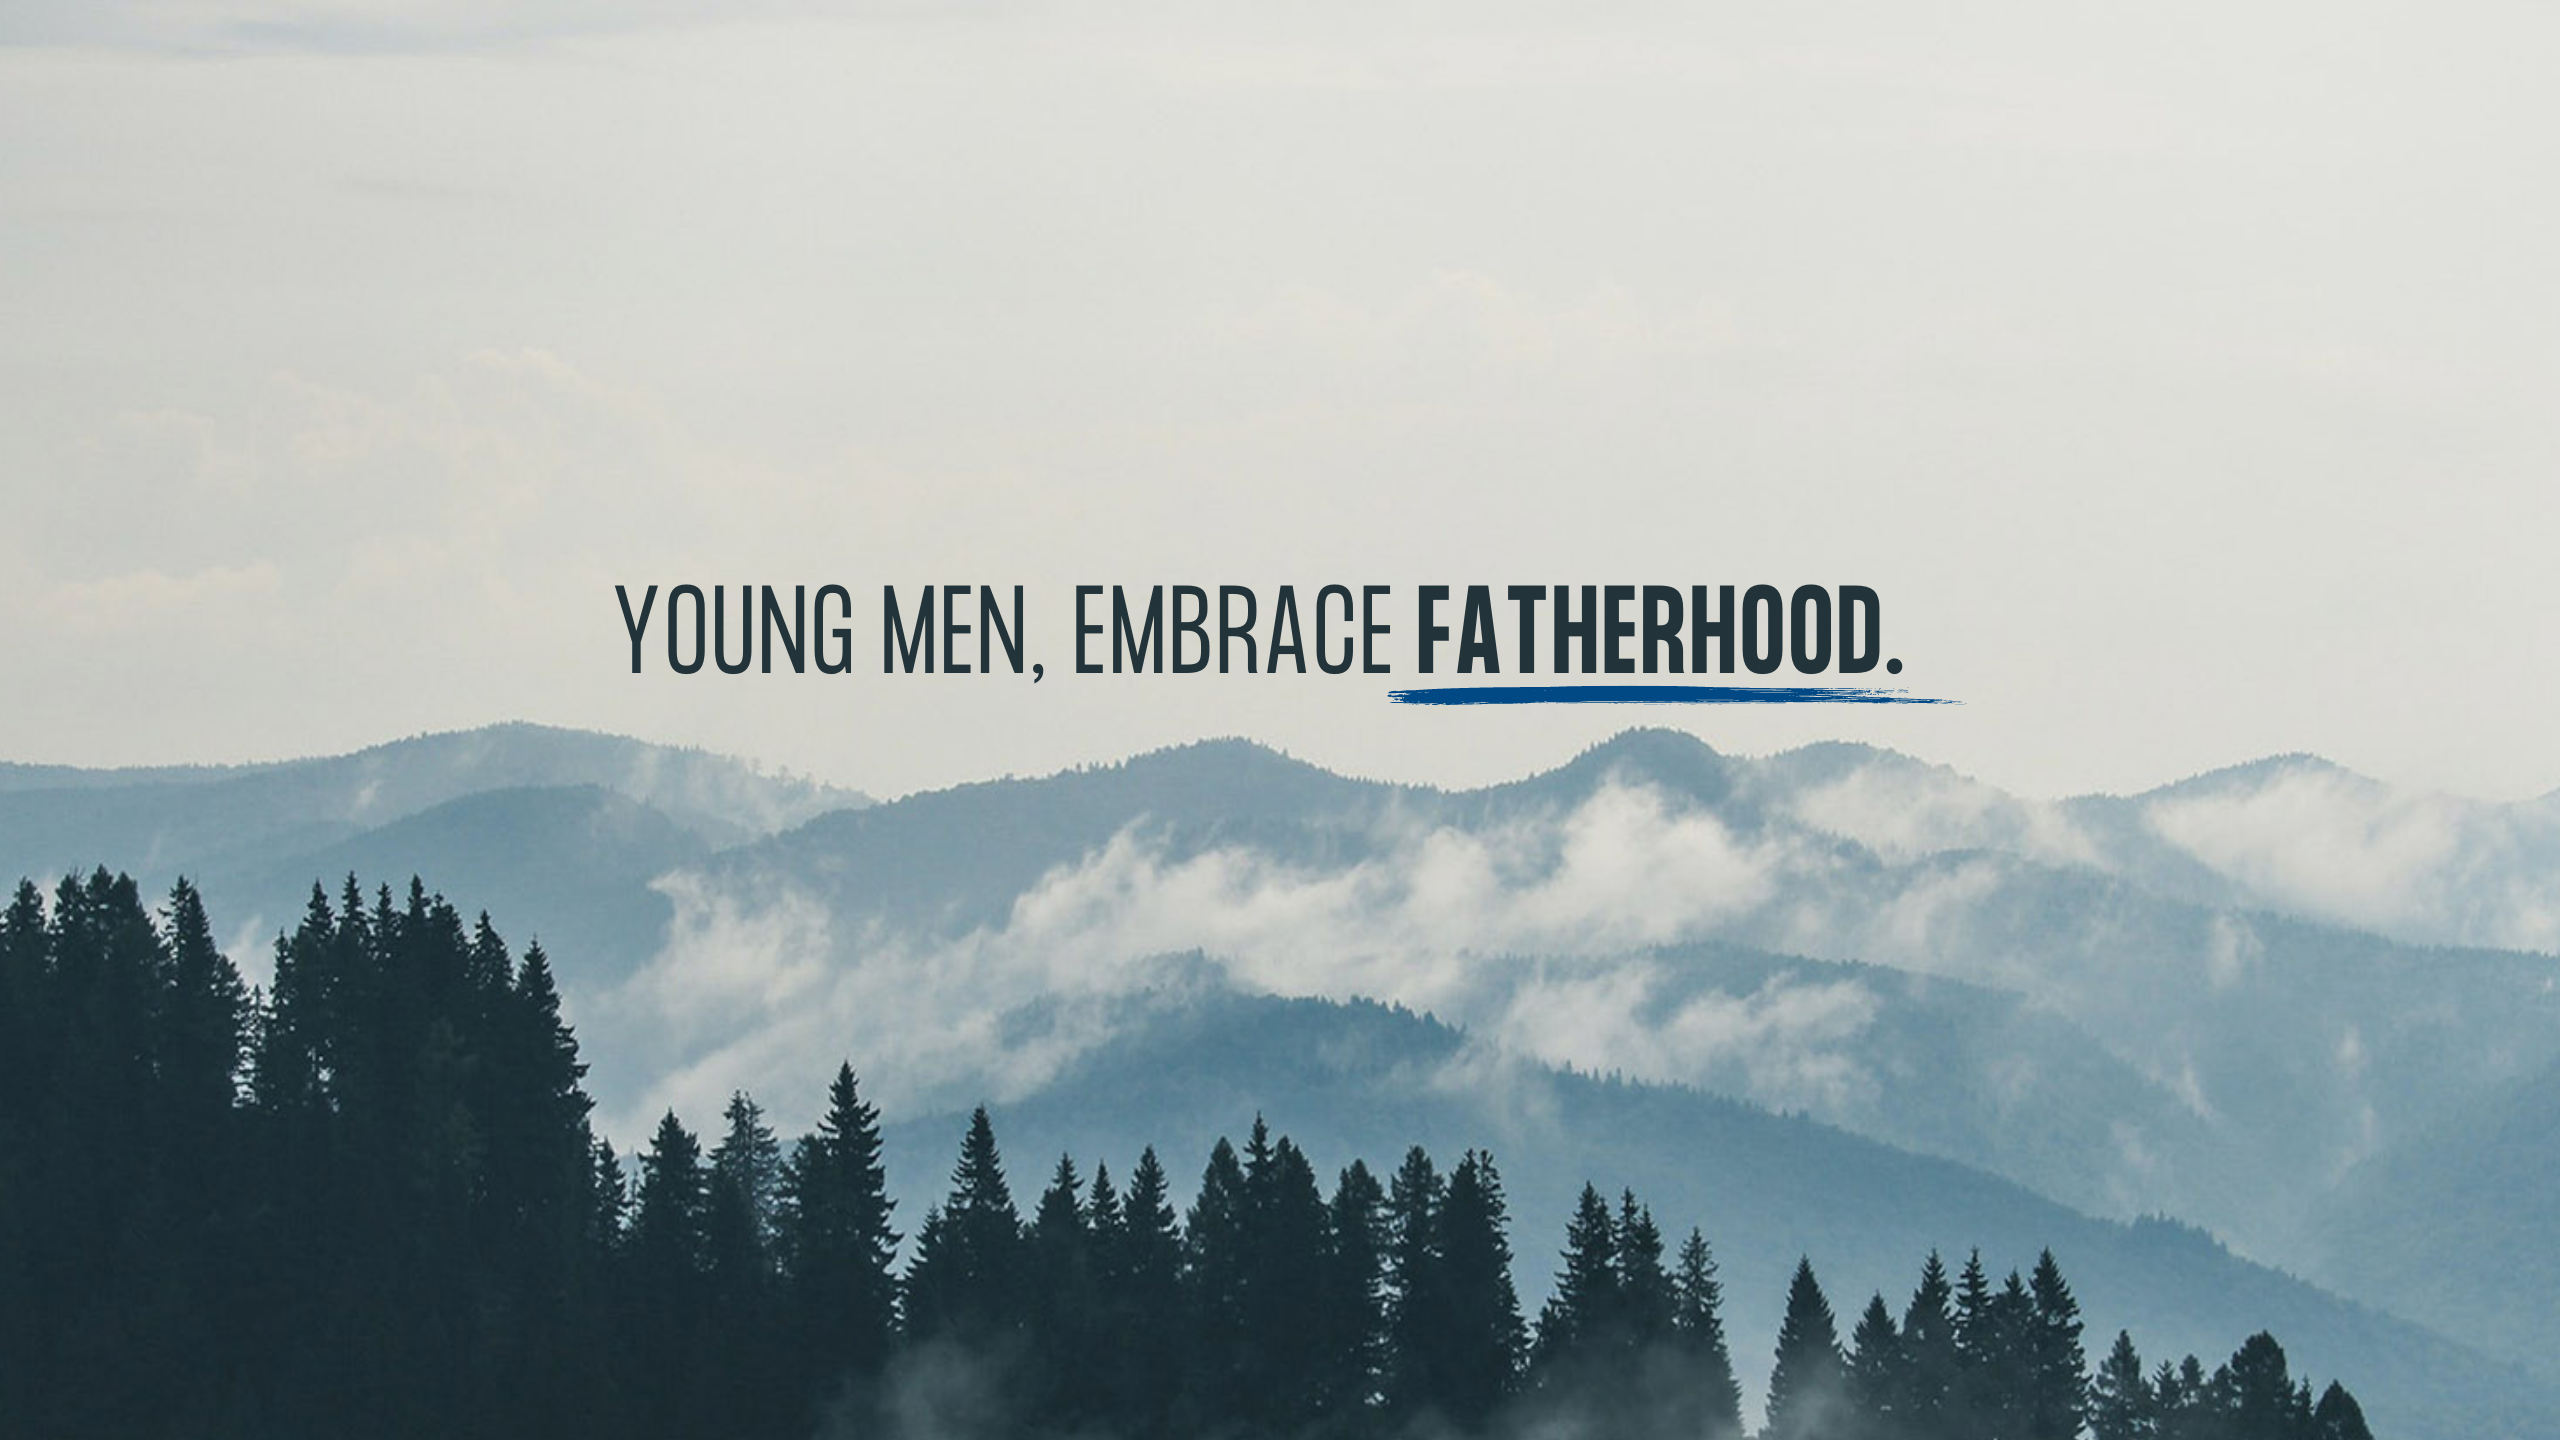 About Forming Fathers